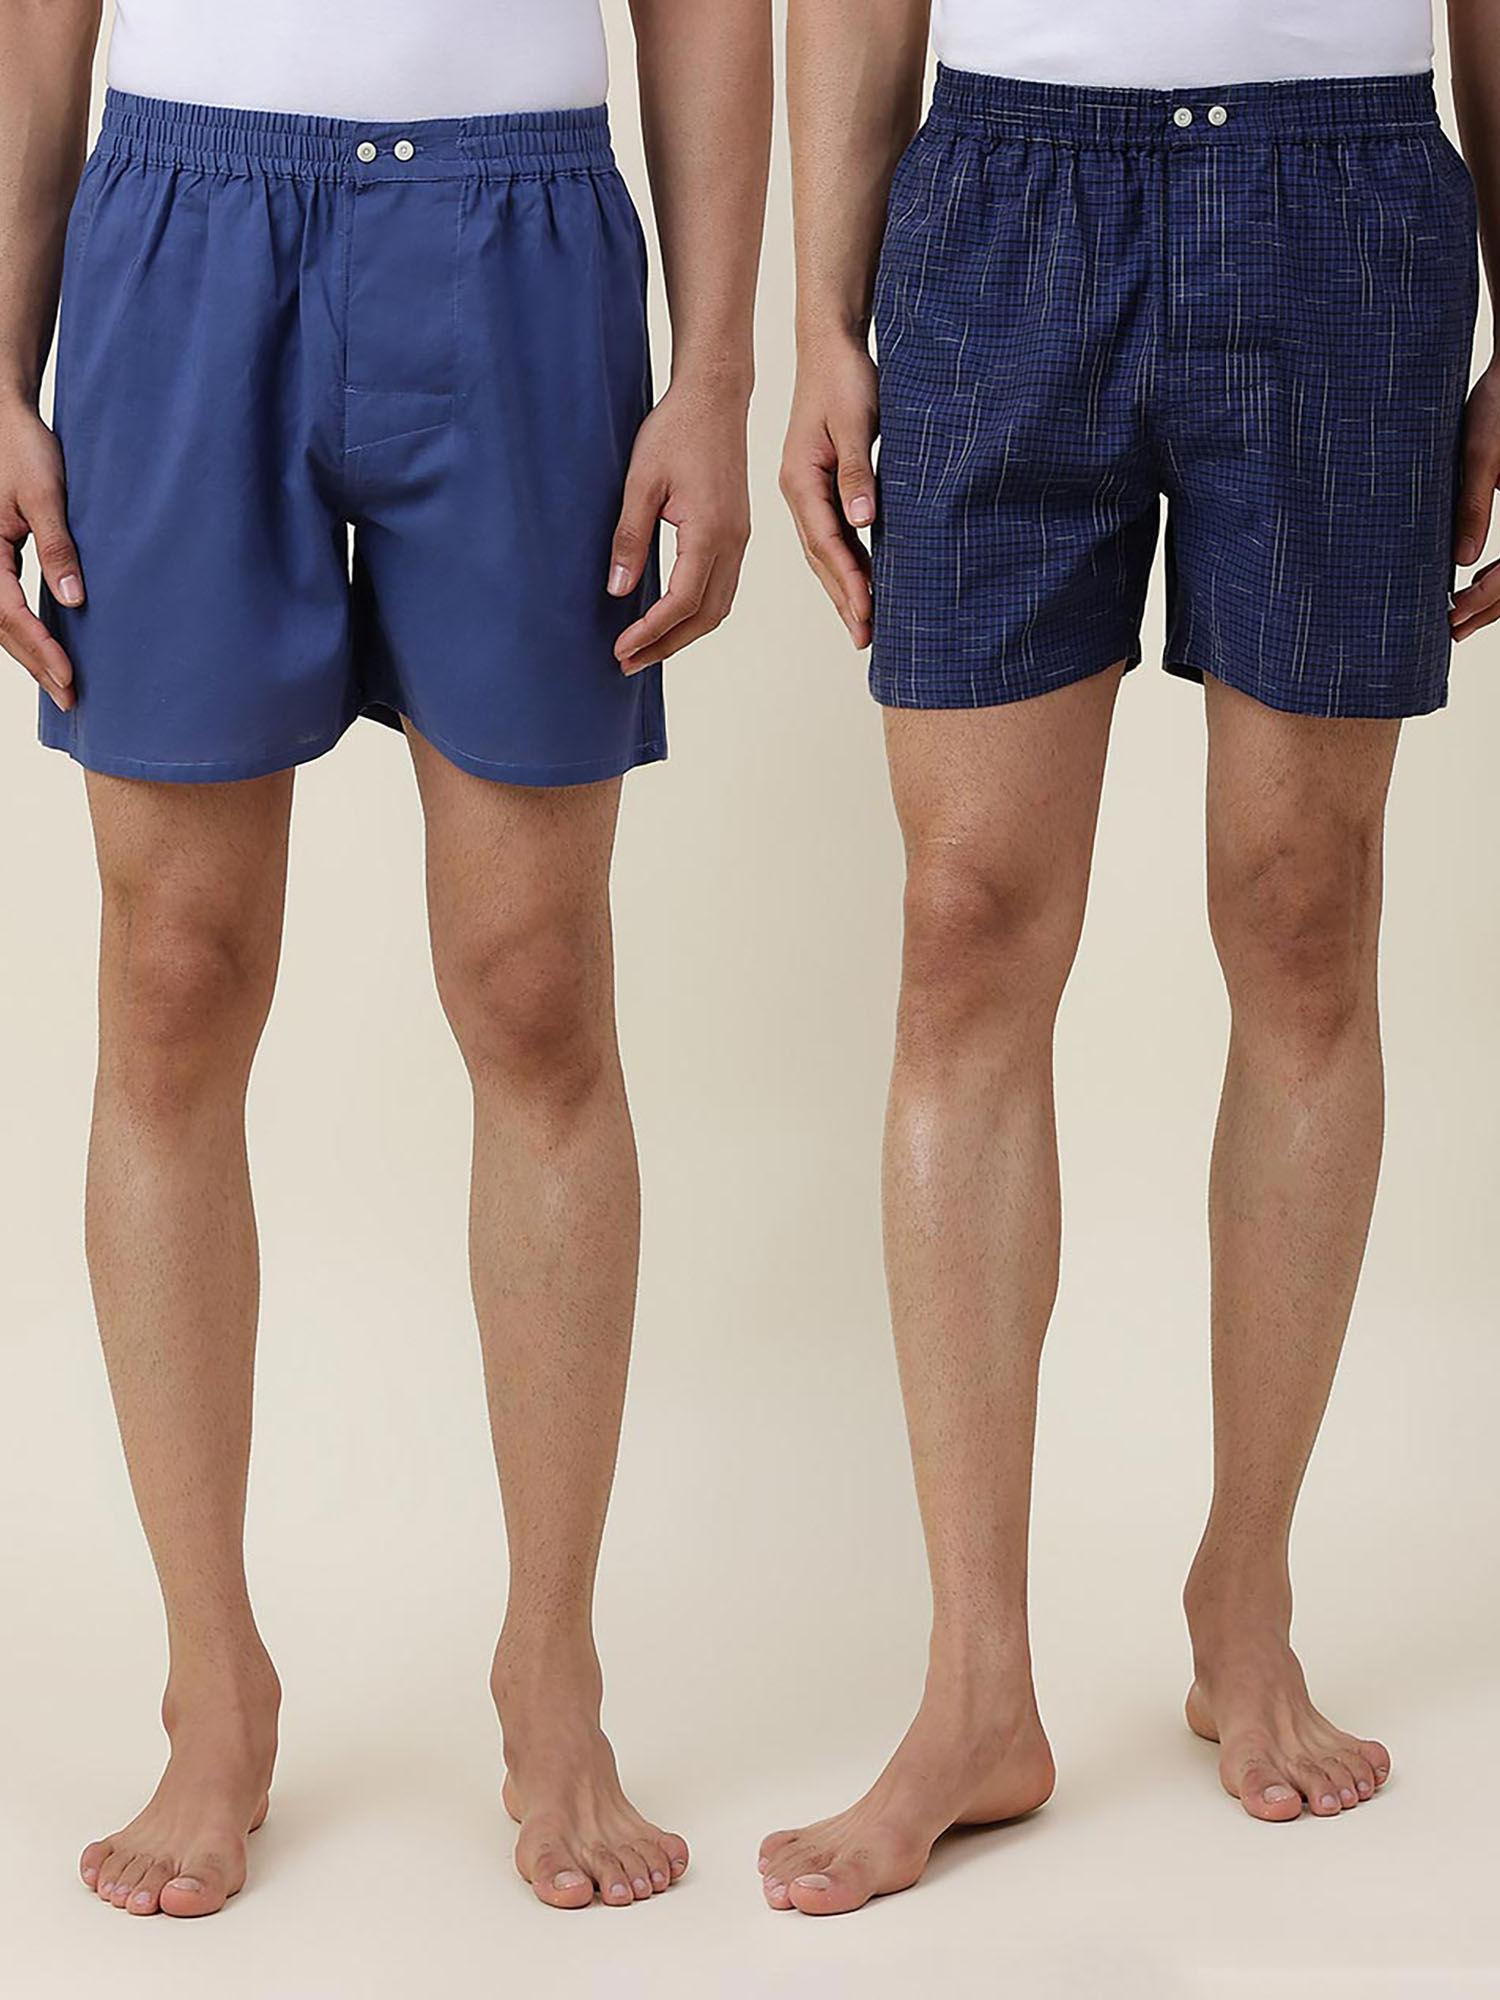 blue cotton full elasticated boxer shorts (pack of 2)